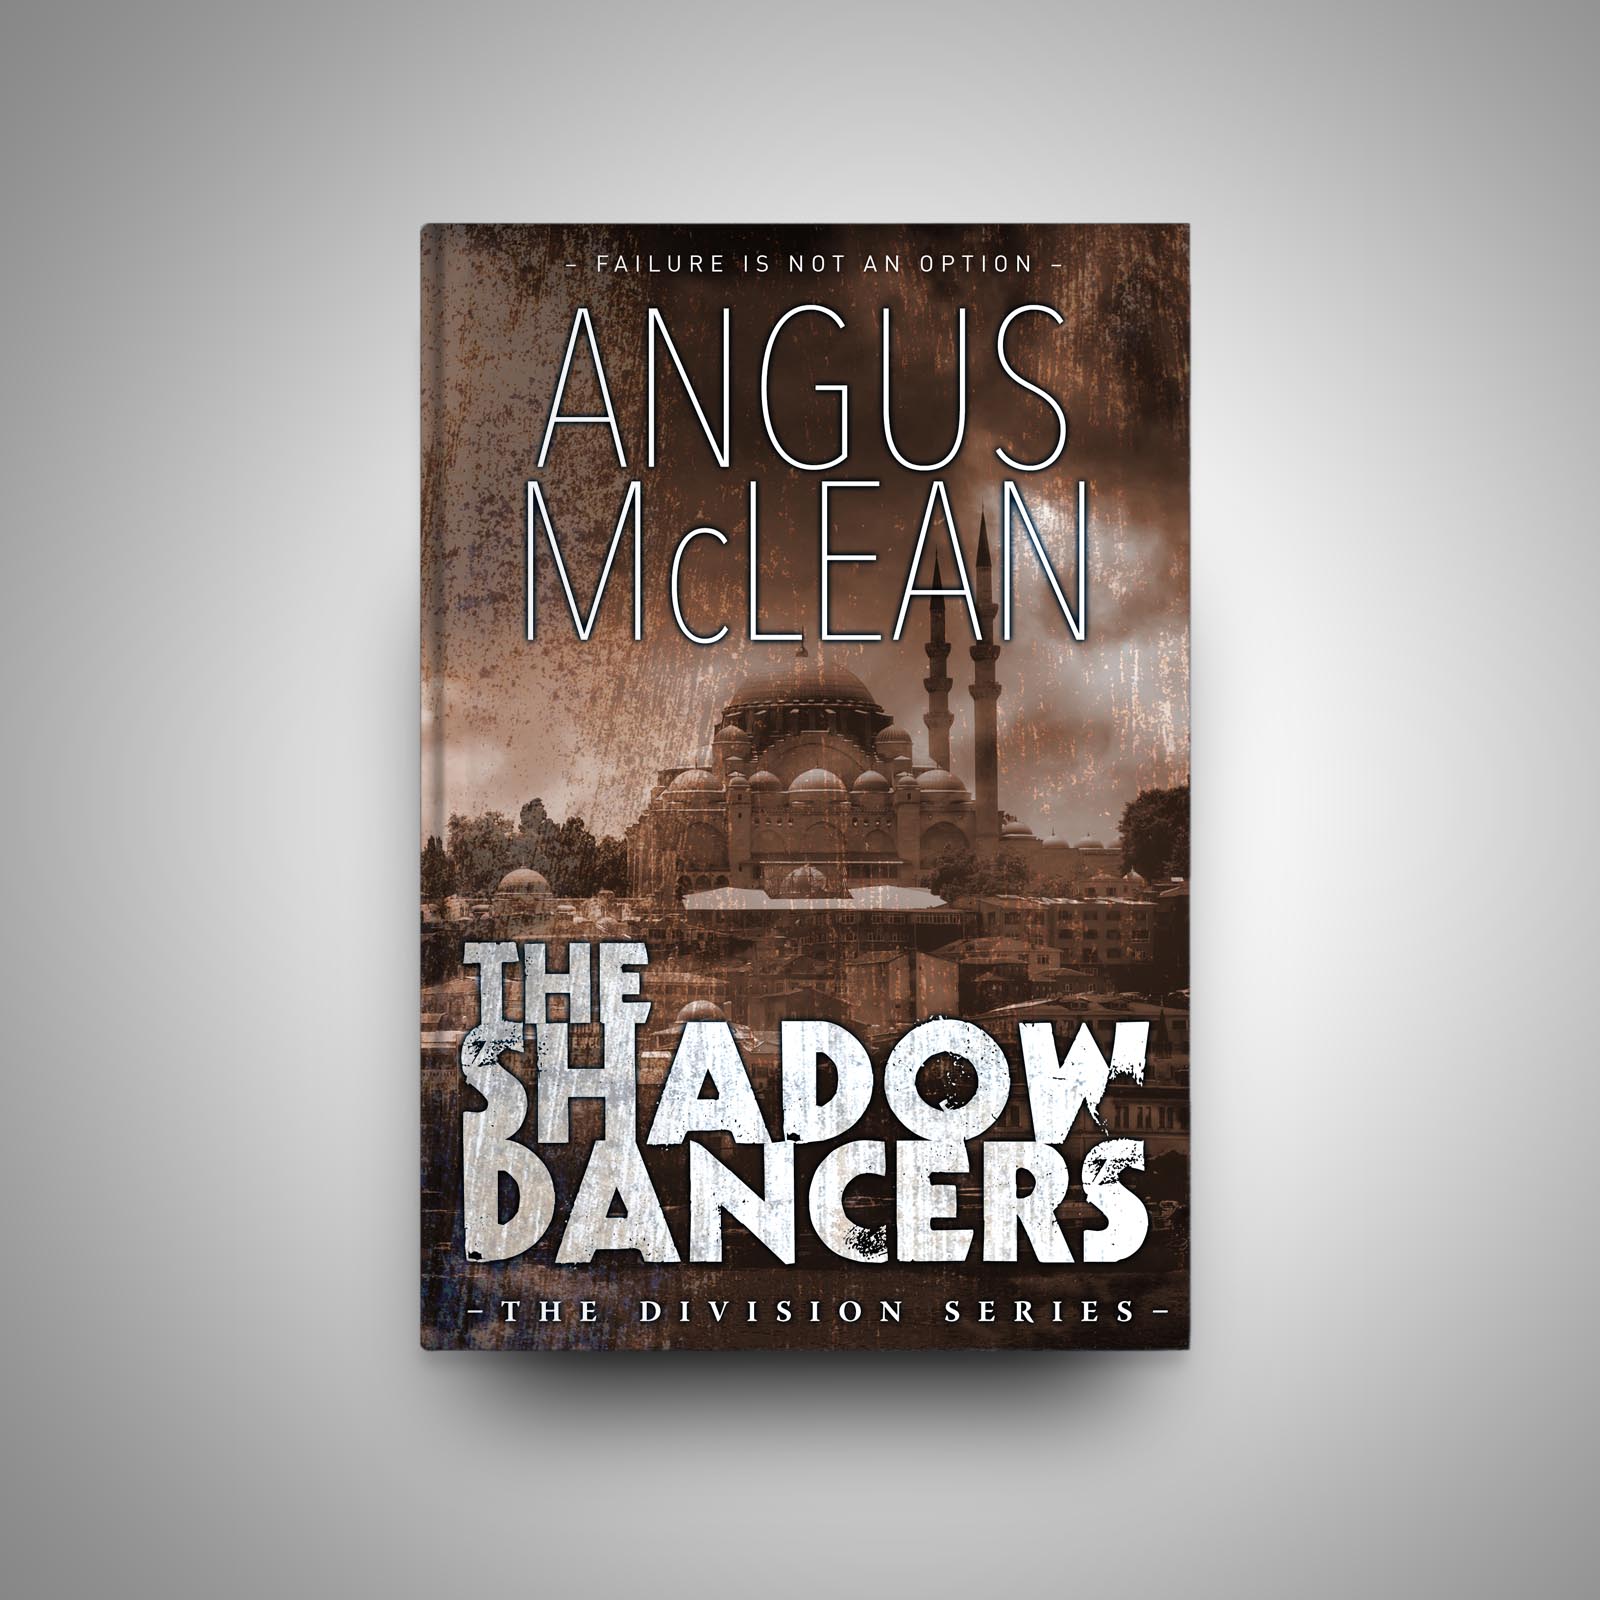 Angus McLean ebook download kindle The Division The Shadow Dancers